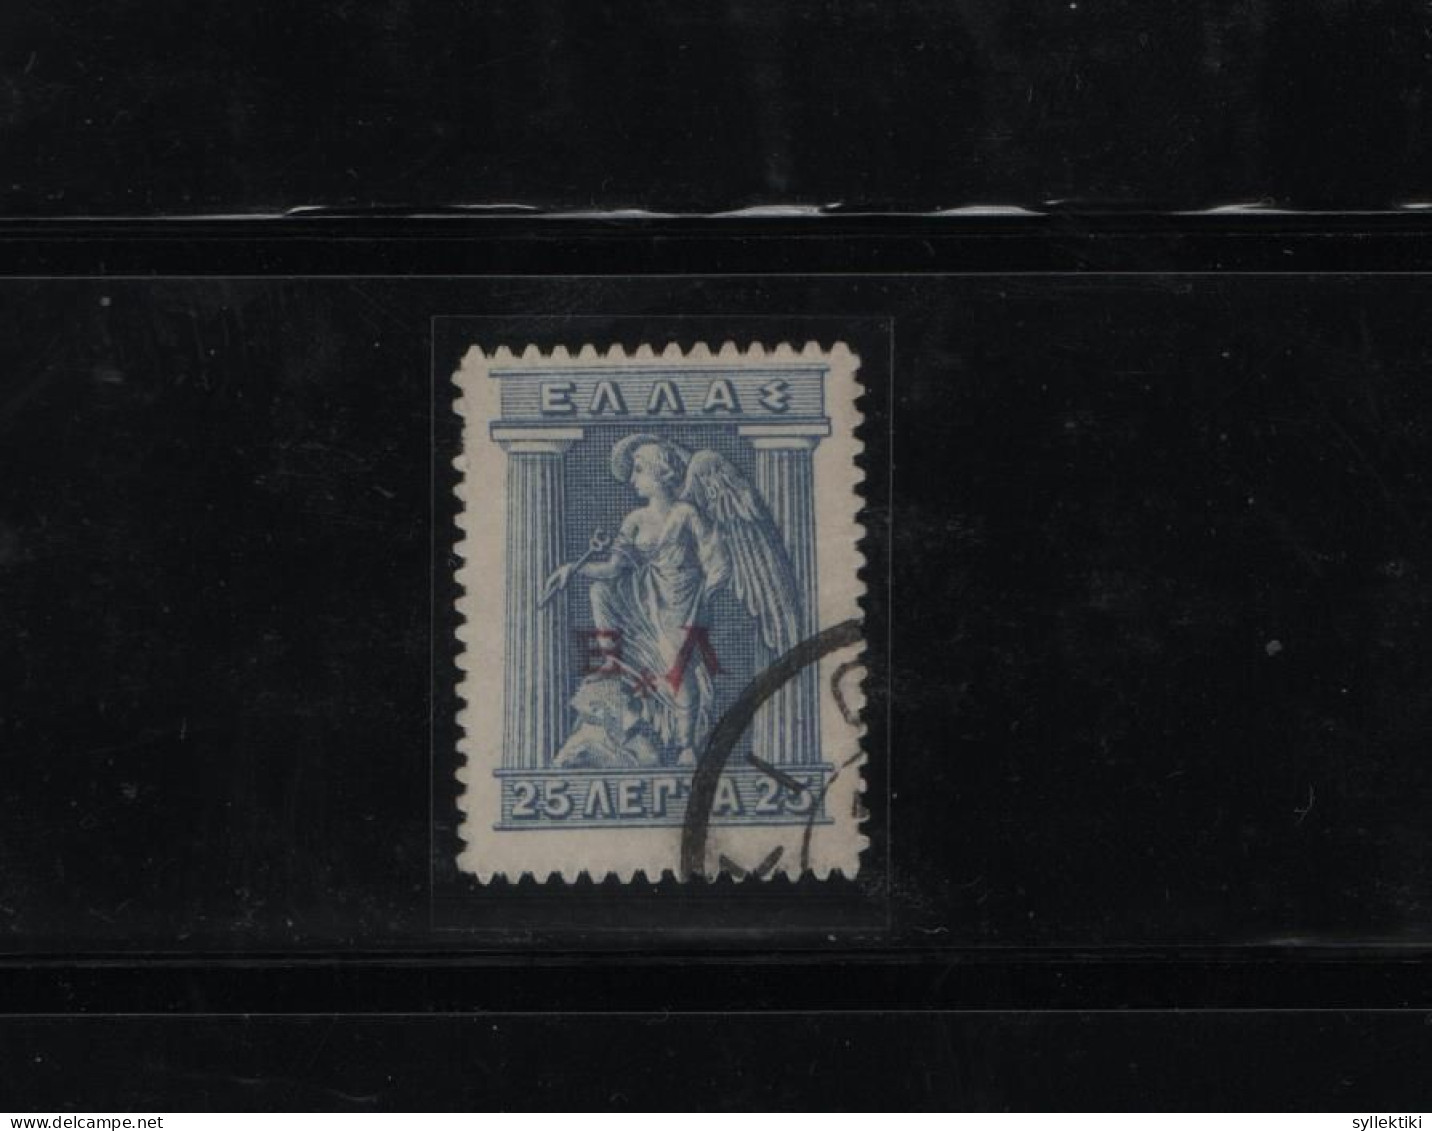 GREECE 1913 Ε.Δ.ΧΙΟΣ OVERPRINT ERROR Ε.Λ. INSTEAD OF Ε.Δ.  ON 25 LEPTA USED STAMP    HELLAS No 1a AND VALUE EURO 420.00 - Chios